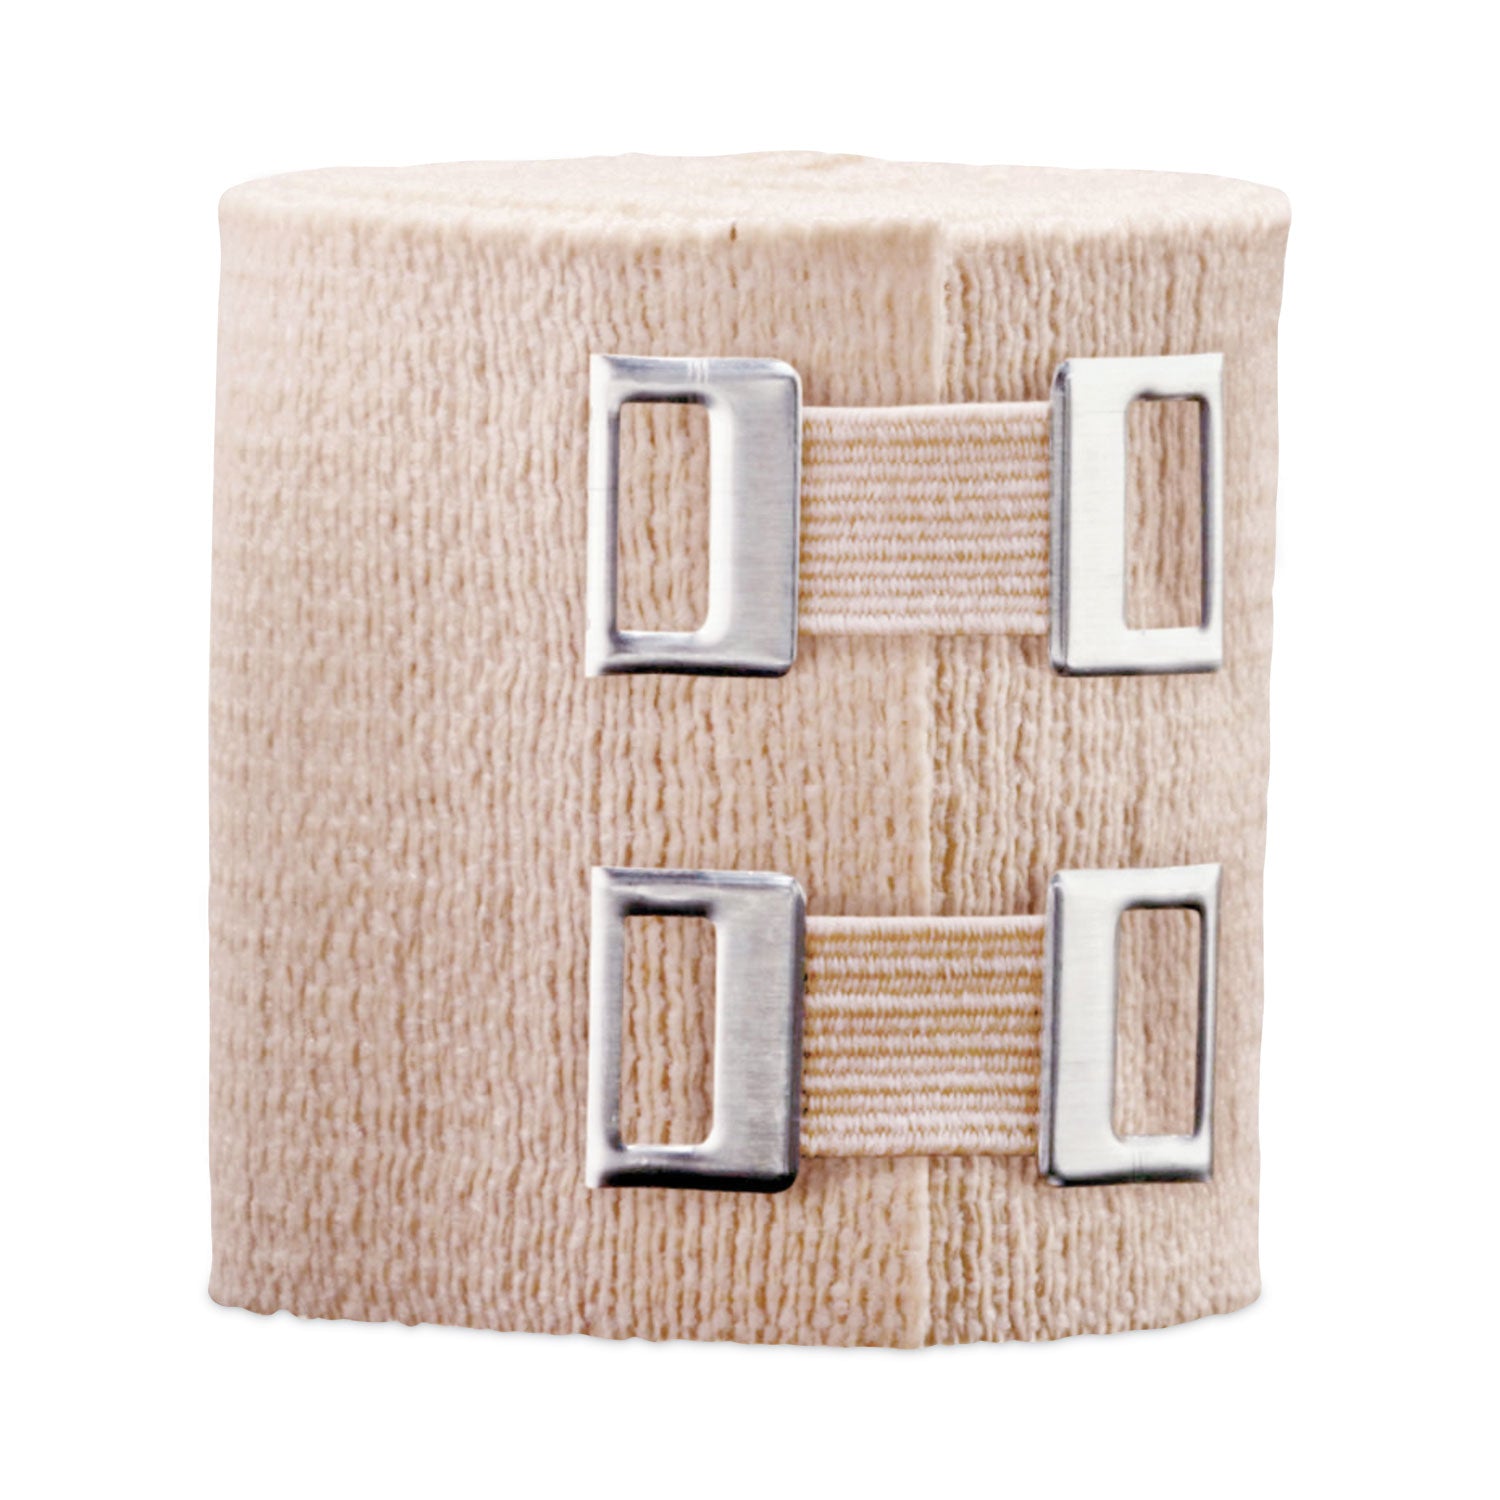 ACE™ Elastic Bandage with E-Z Clips, 2 x 50